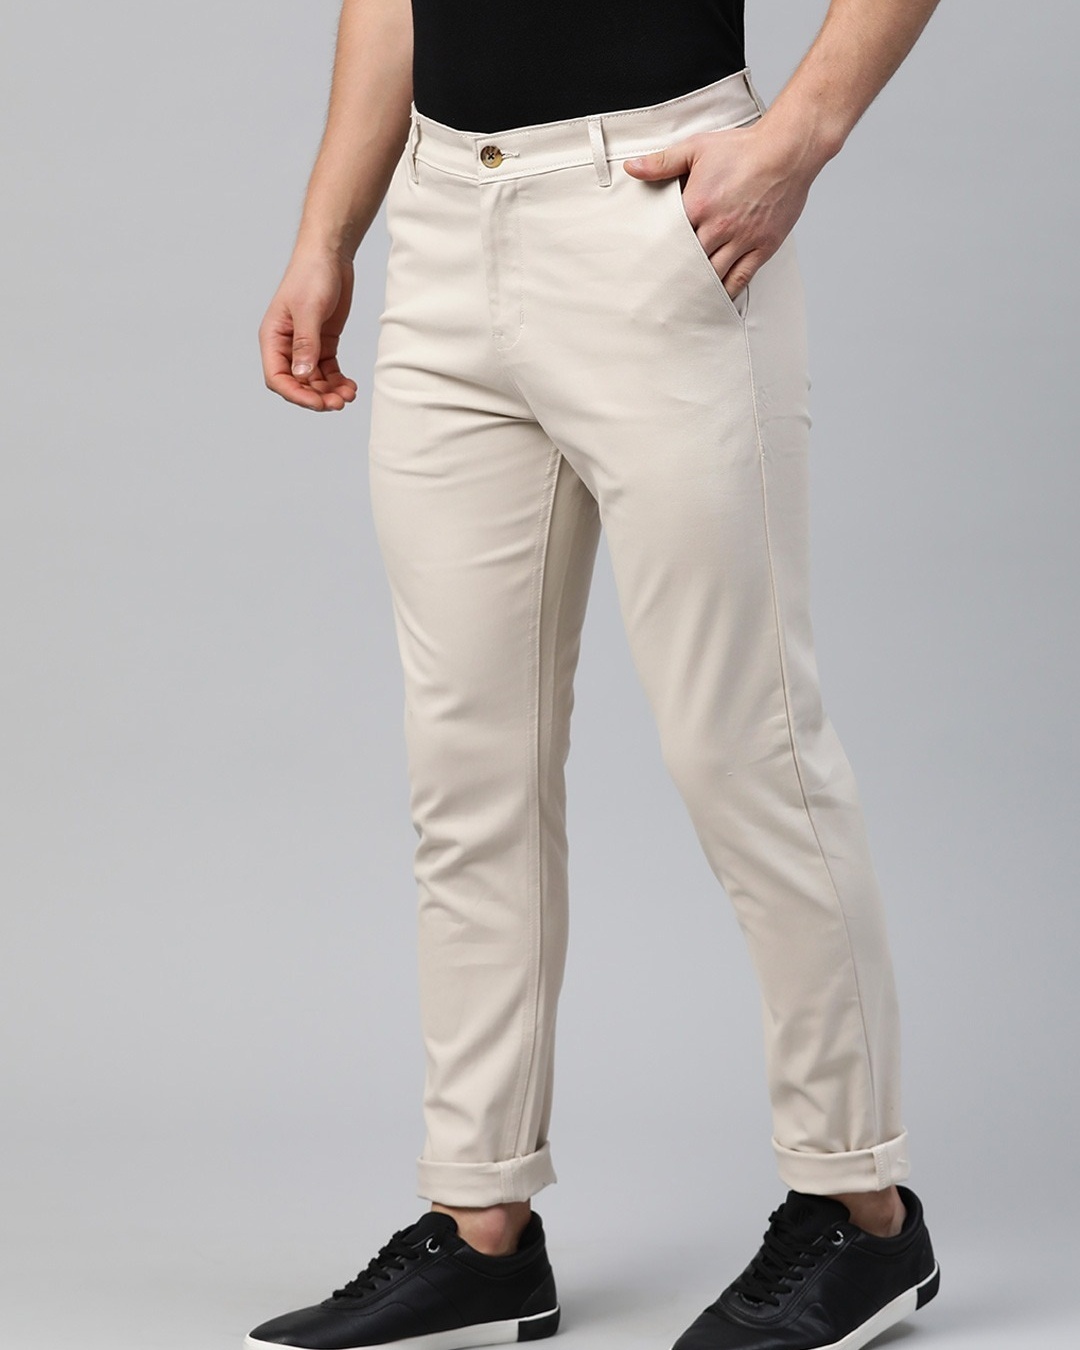 Buy White Trousers  Pants for Men by ARMANI EXCHANGE Online  Ajiocom